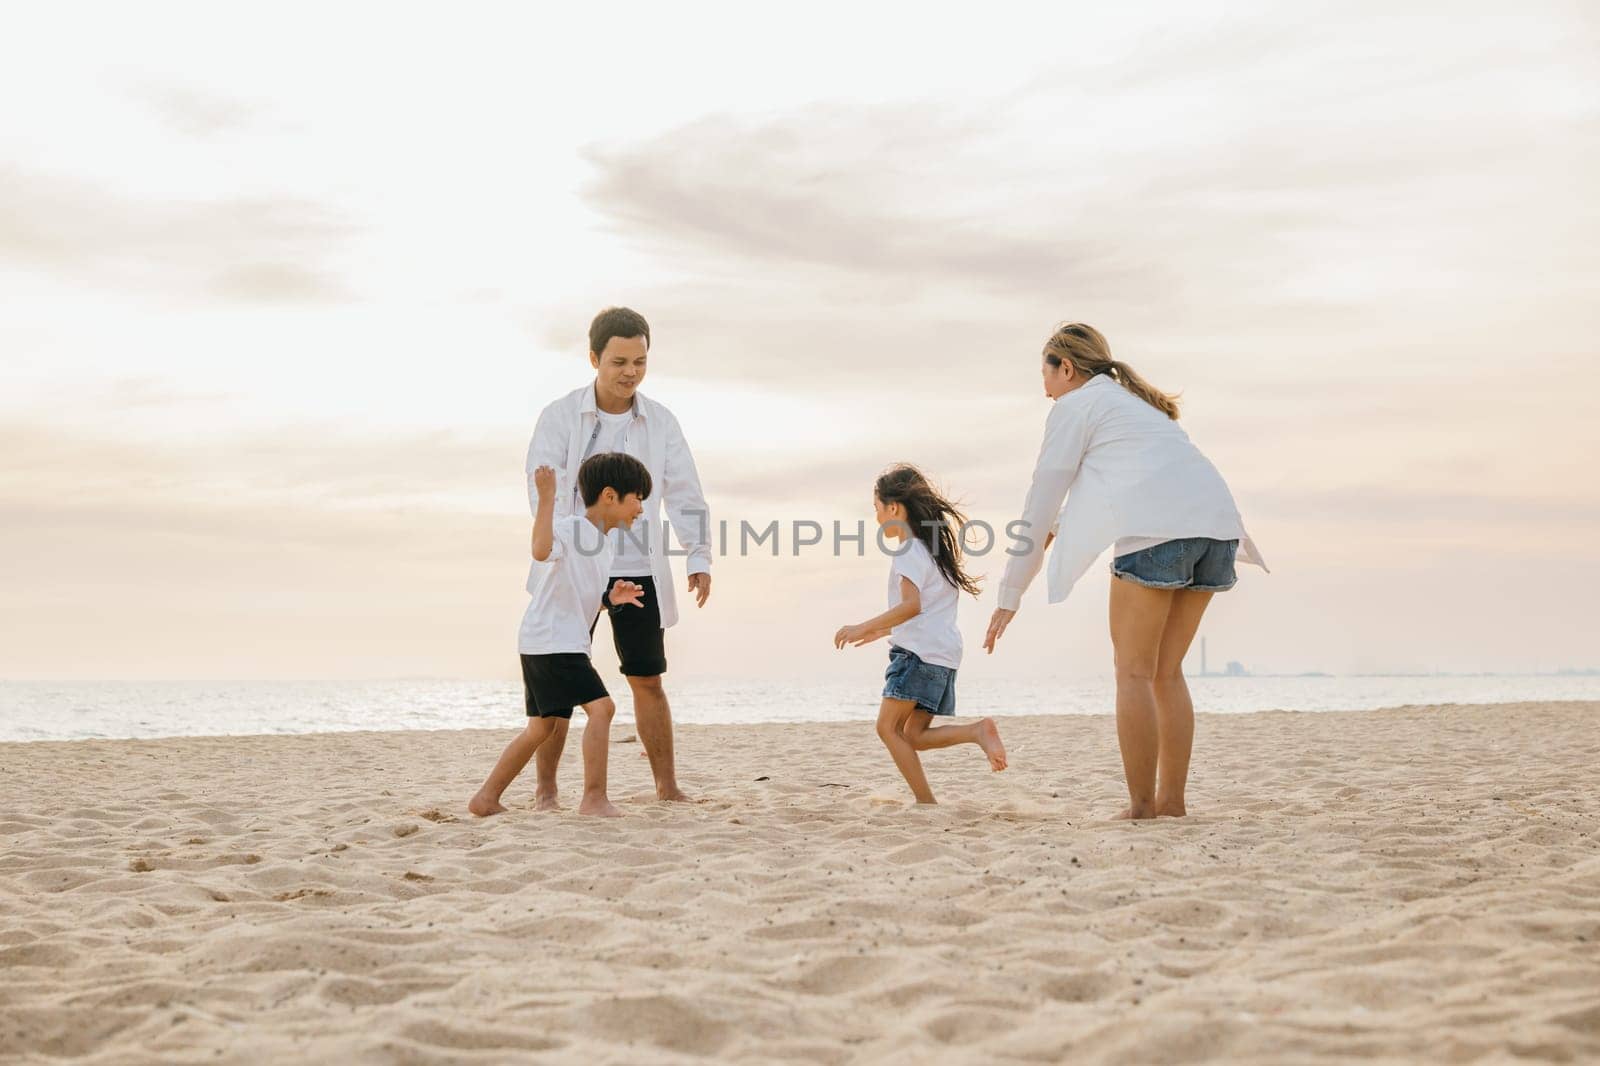 A happy family enjoying a carefree day at the beach. Smiling father and mother with son and daughter running playing and laughing together. Summer holiday vibes with quality time and family bonding. by Sorapop